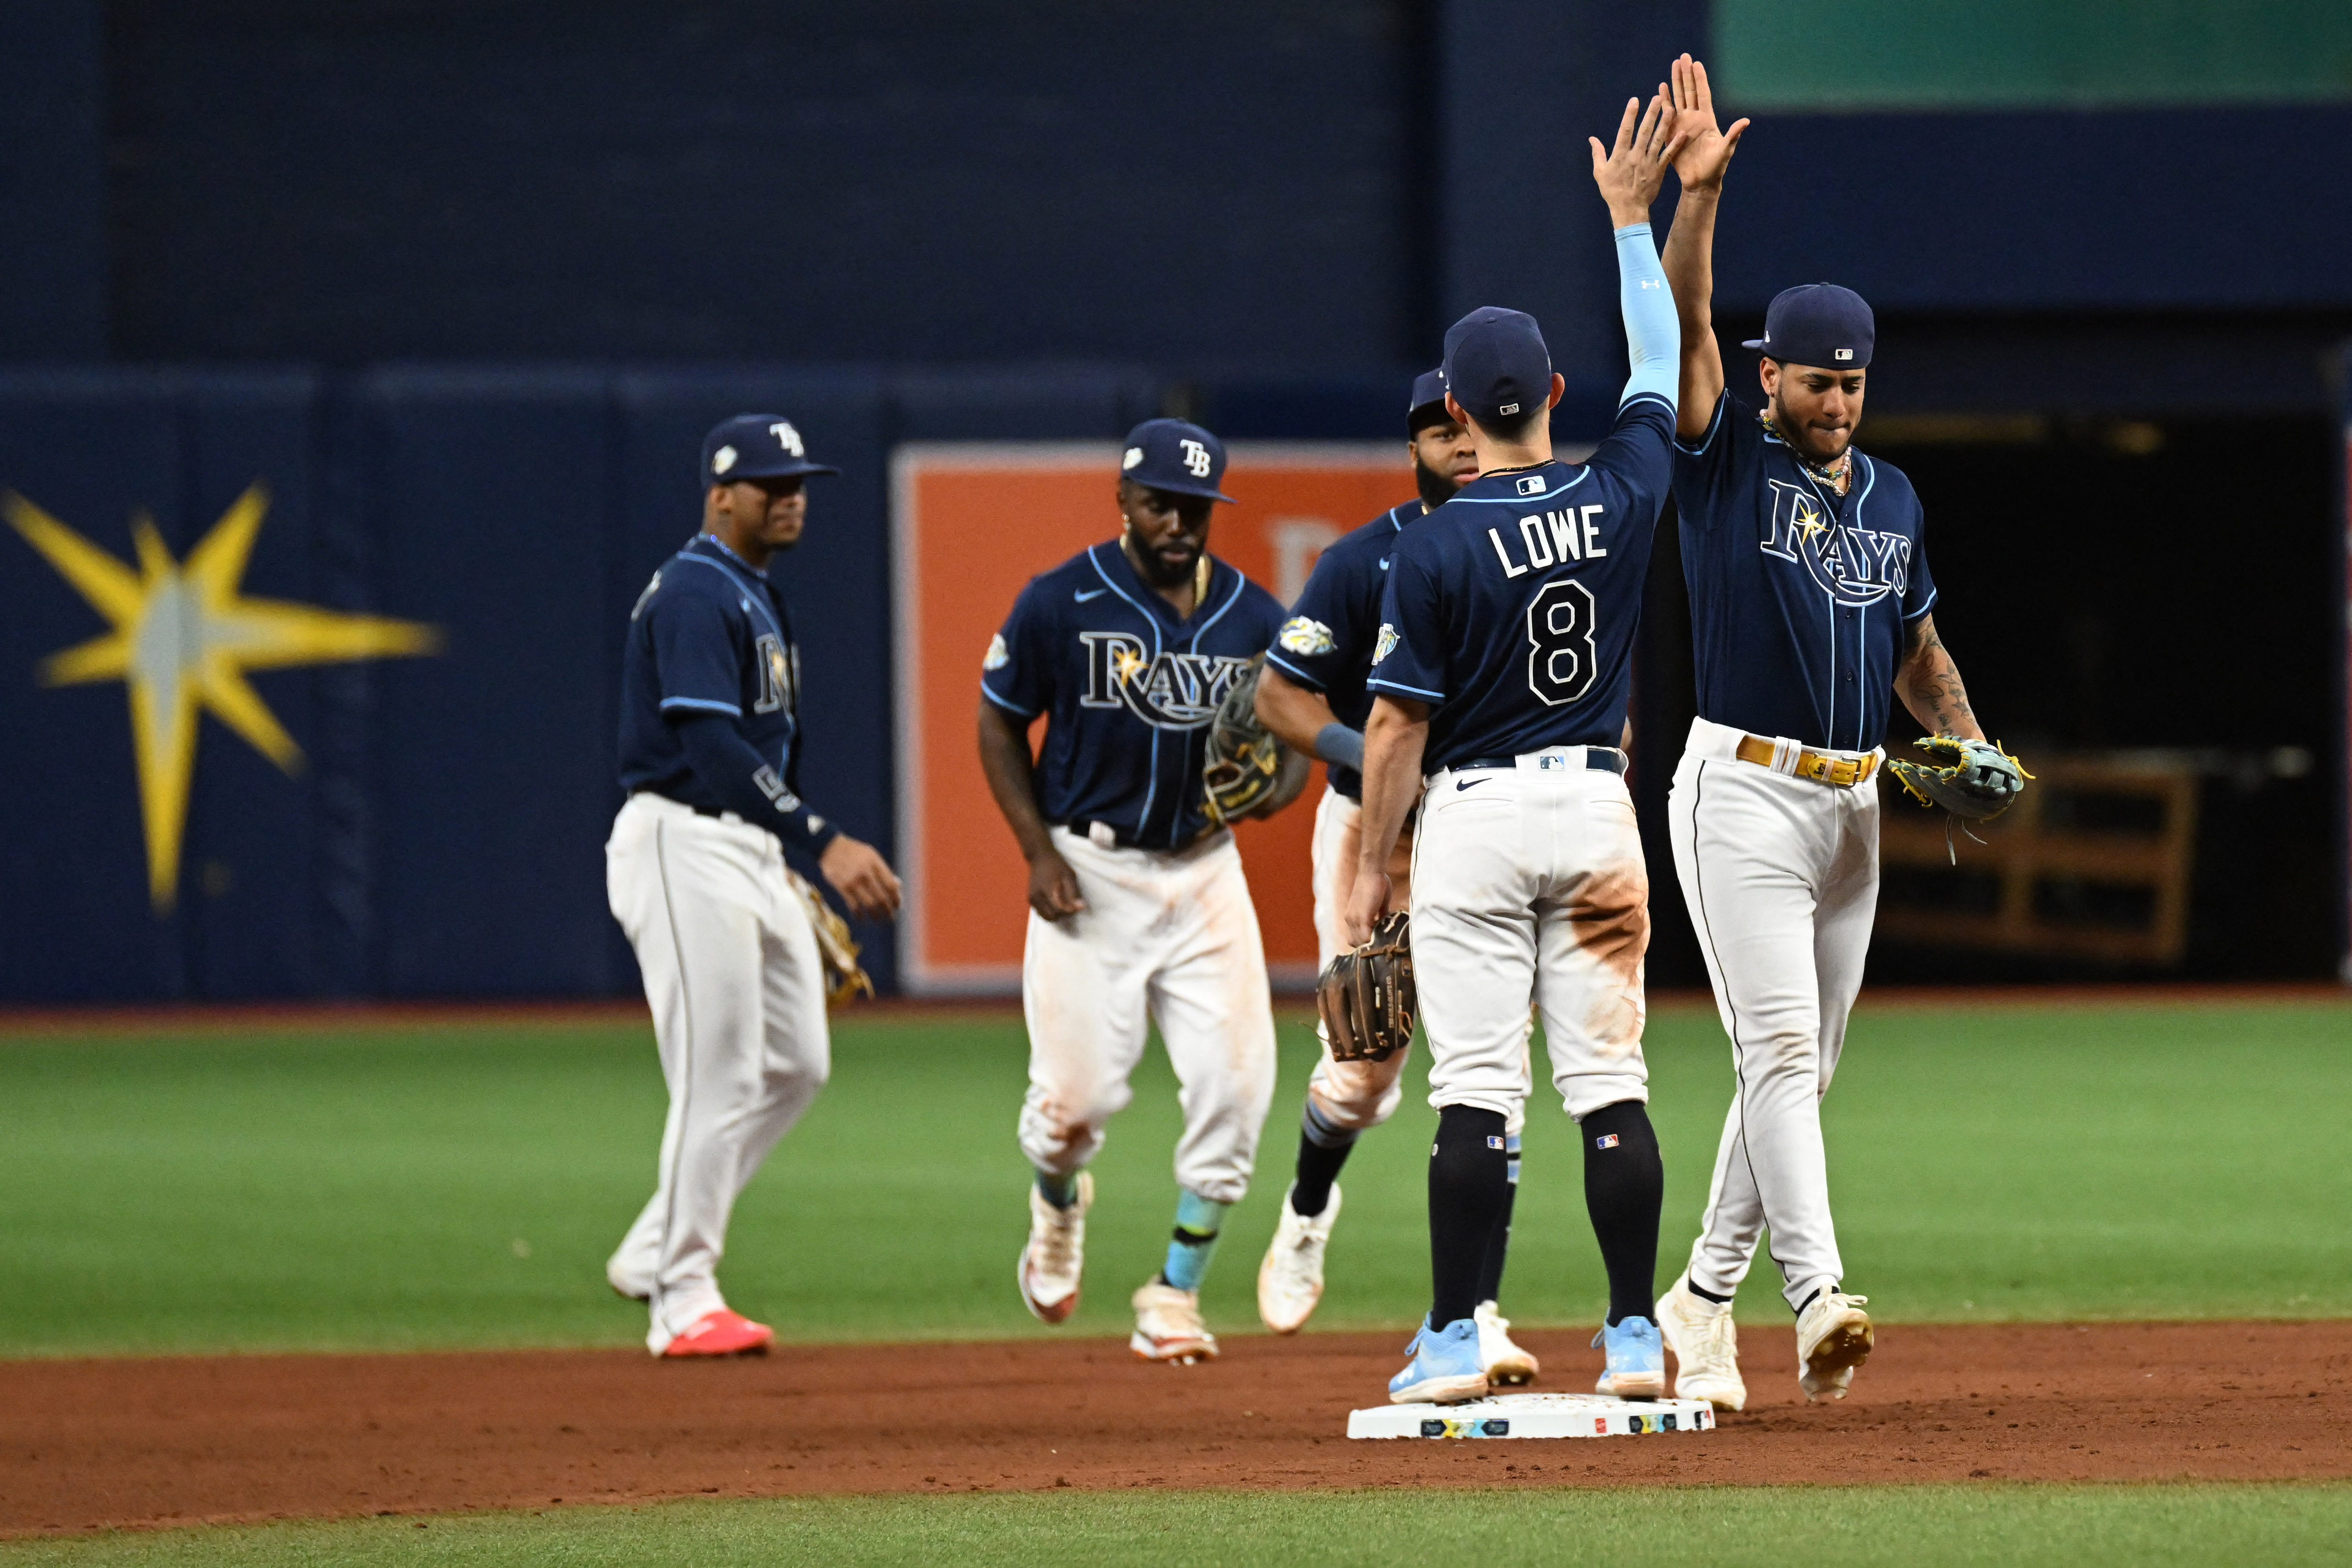 Tyler Glasnow silences Miami Marlins' bats in 1-0 Tampa Bay Rays win